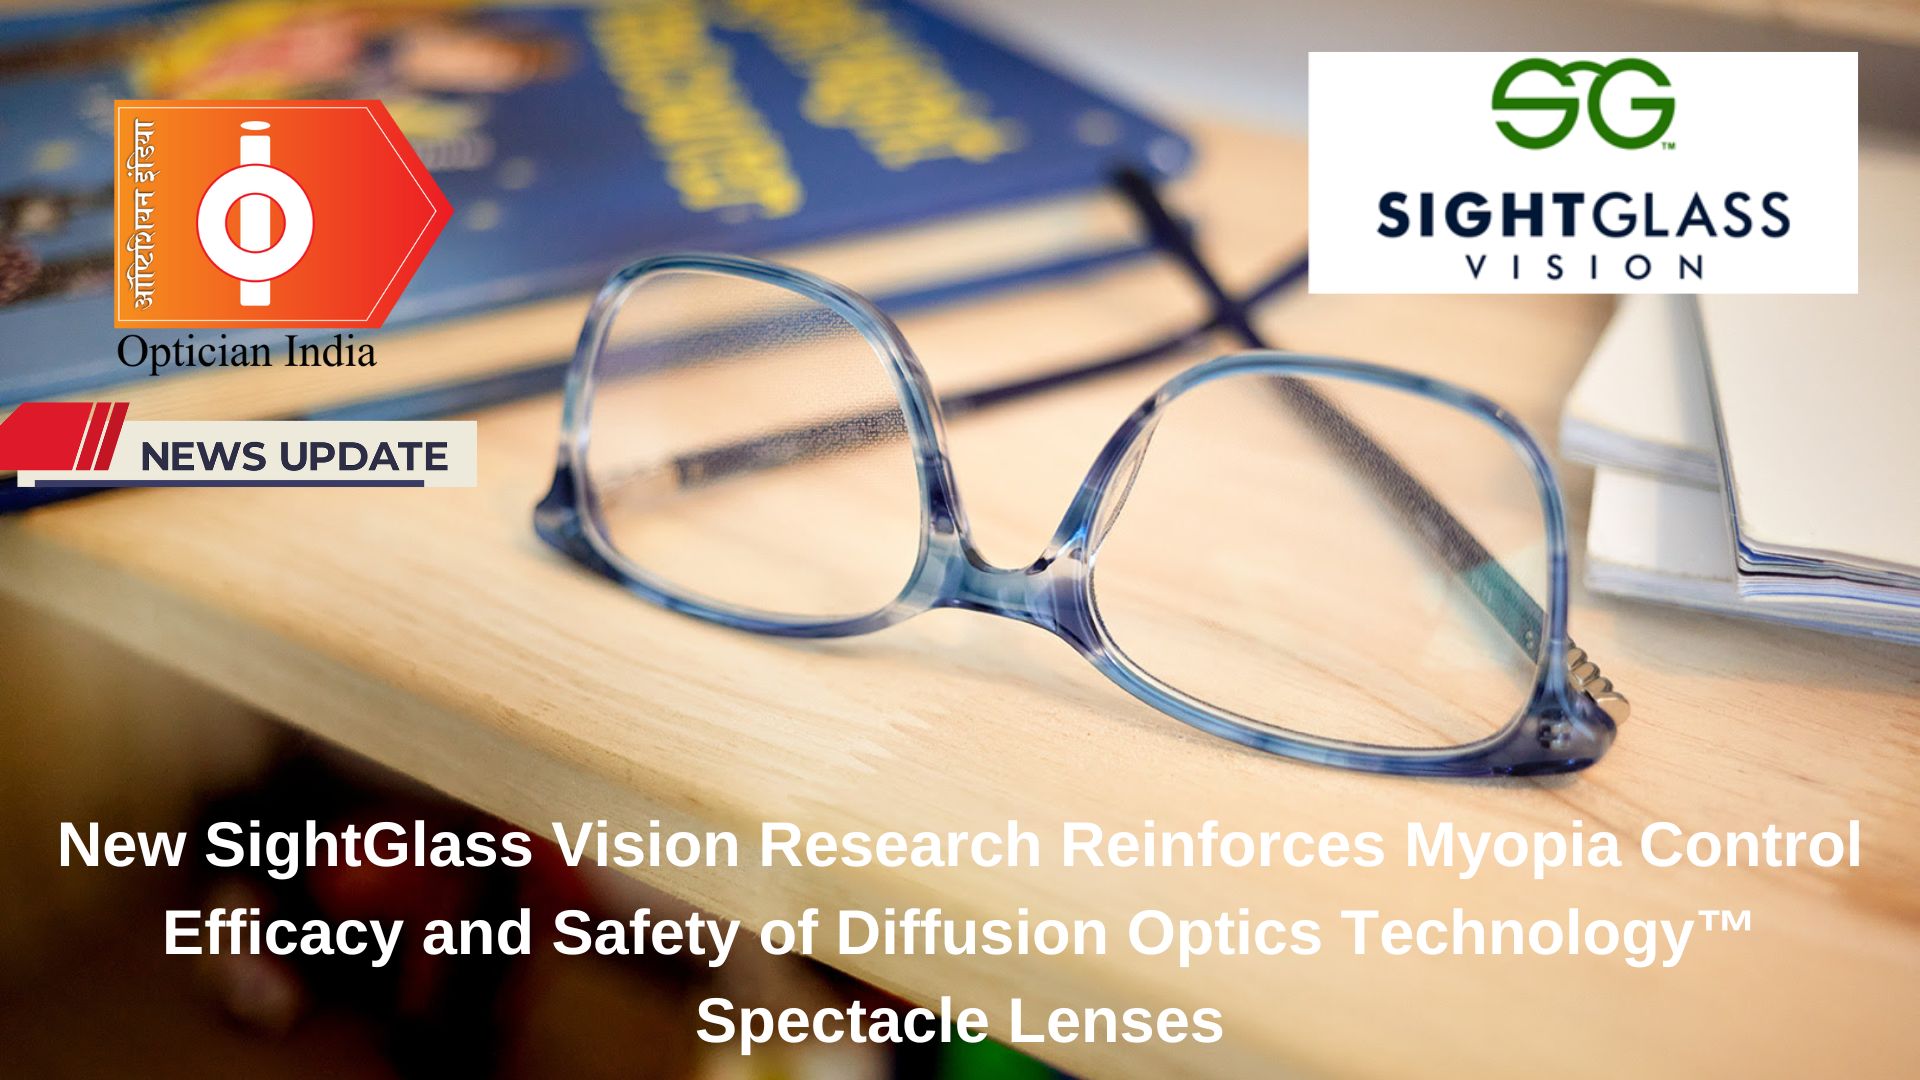 New_SightGlass_Vision_Research_Reinforces_Myopia_Control_Efficacy_and_Safety_of_Diffusion_Optics_Technology™_Spectacle_Lenses.jpg